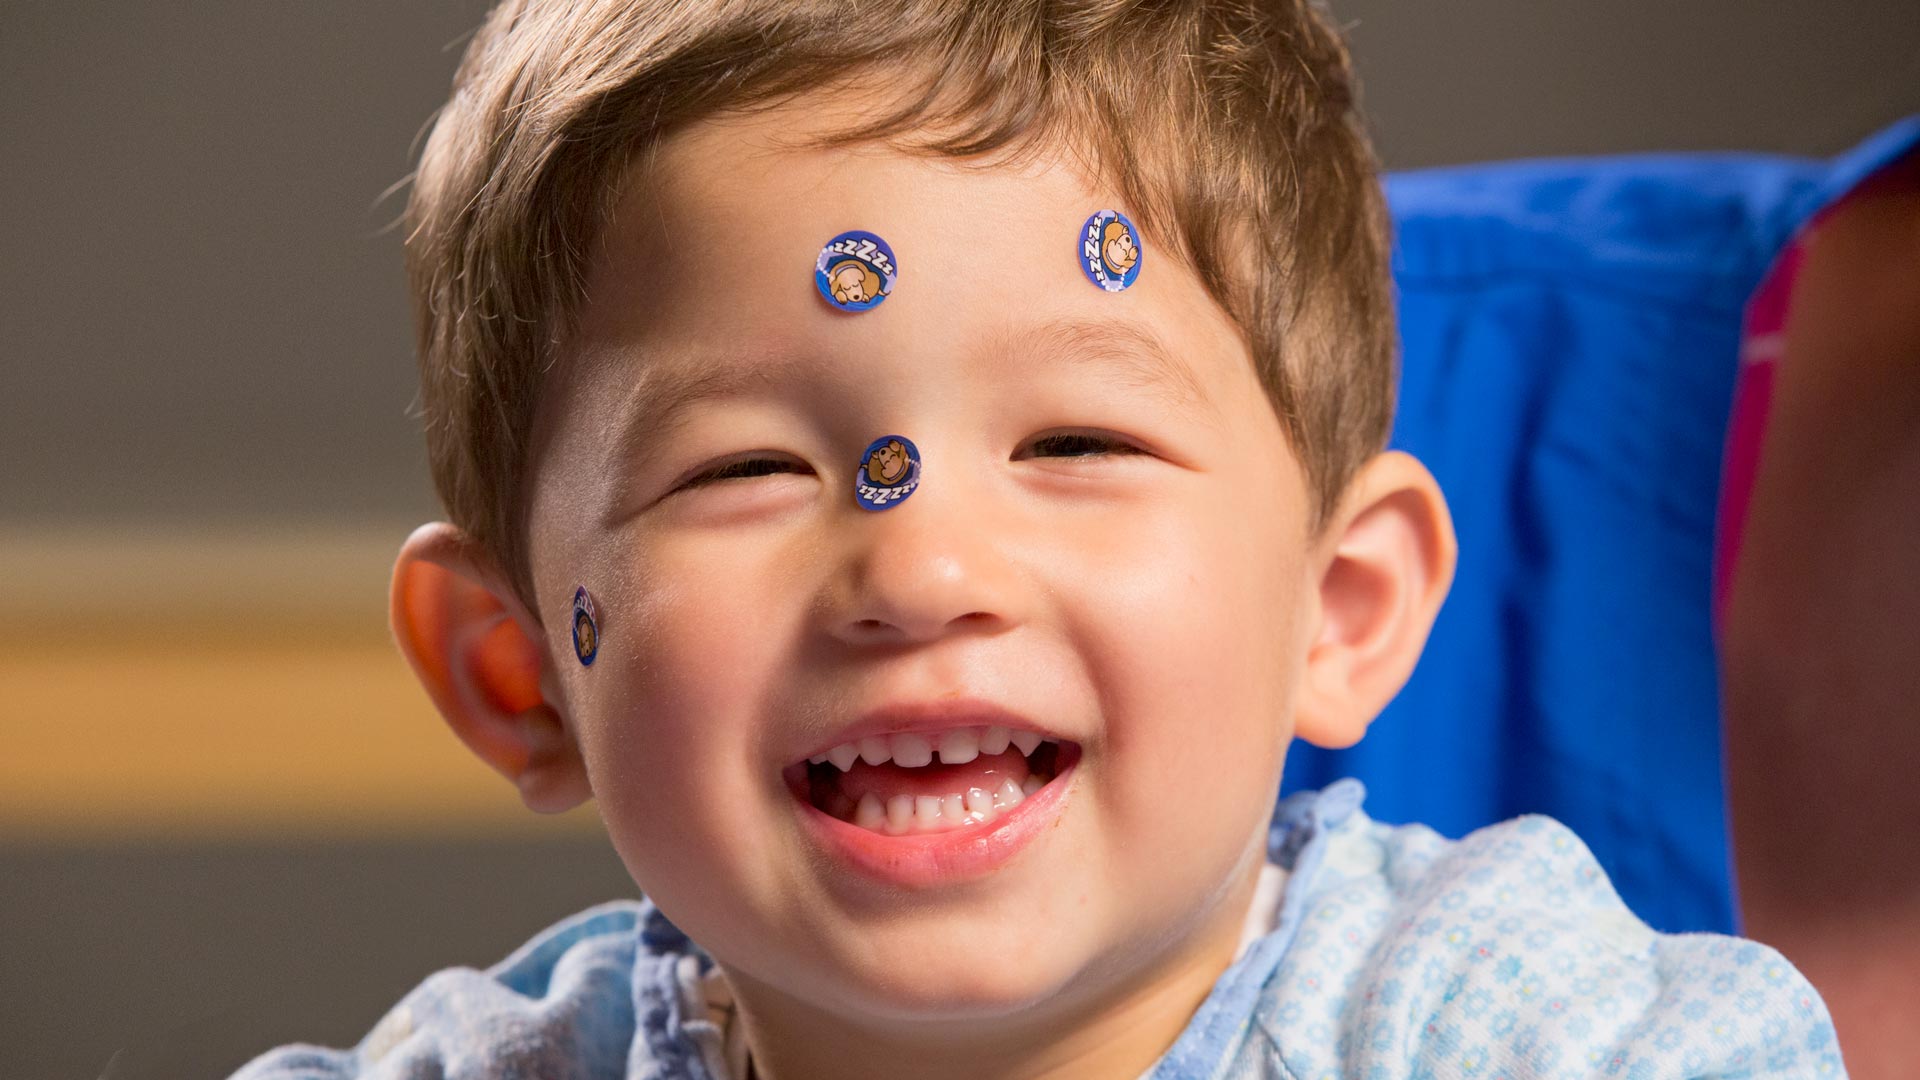 Young boy laughing with puppy stickers on his face